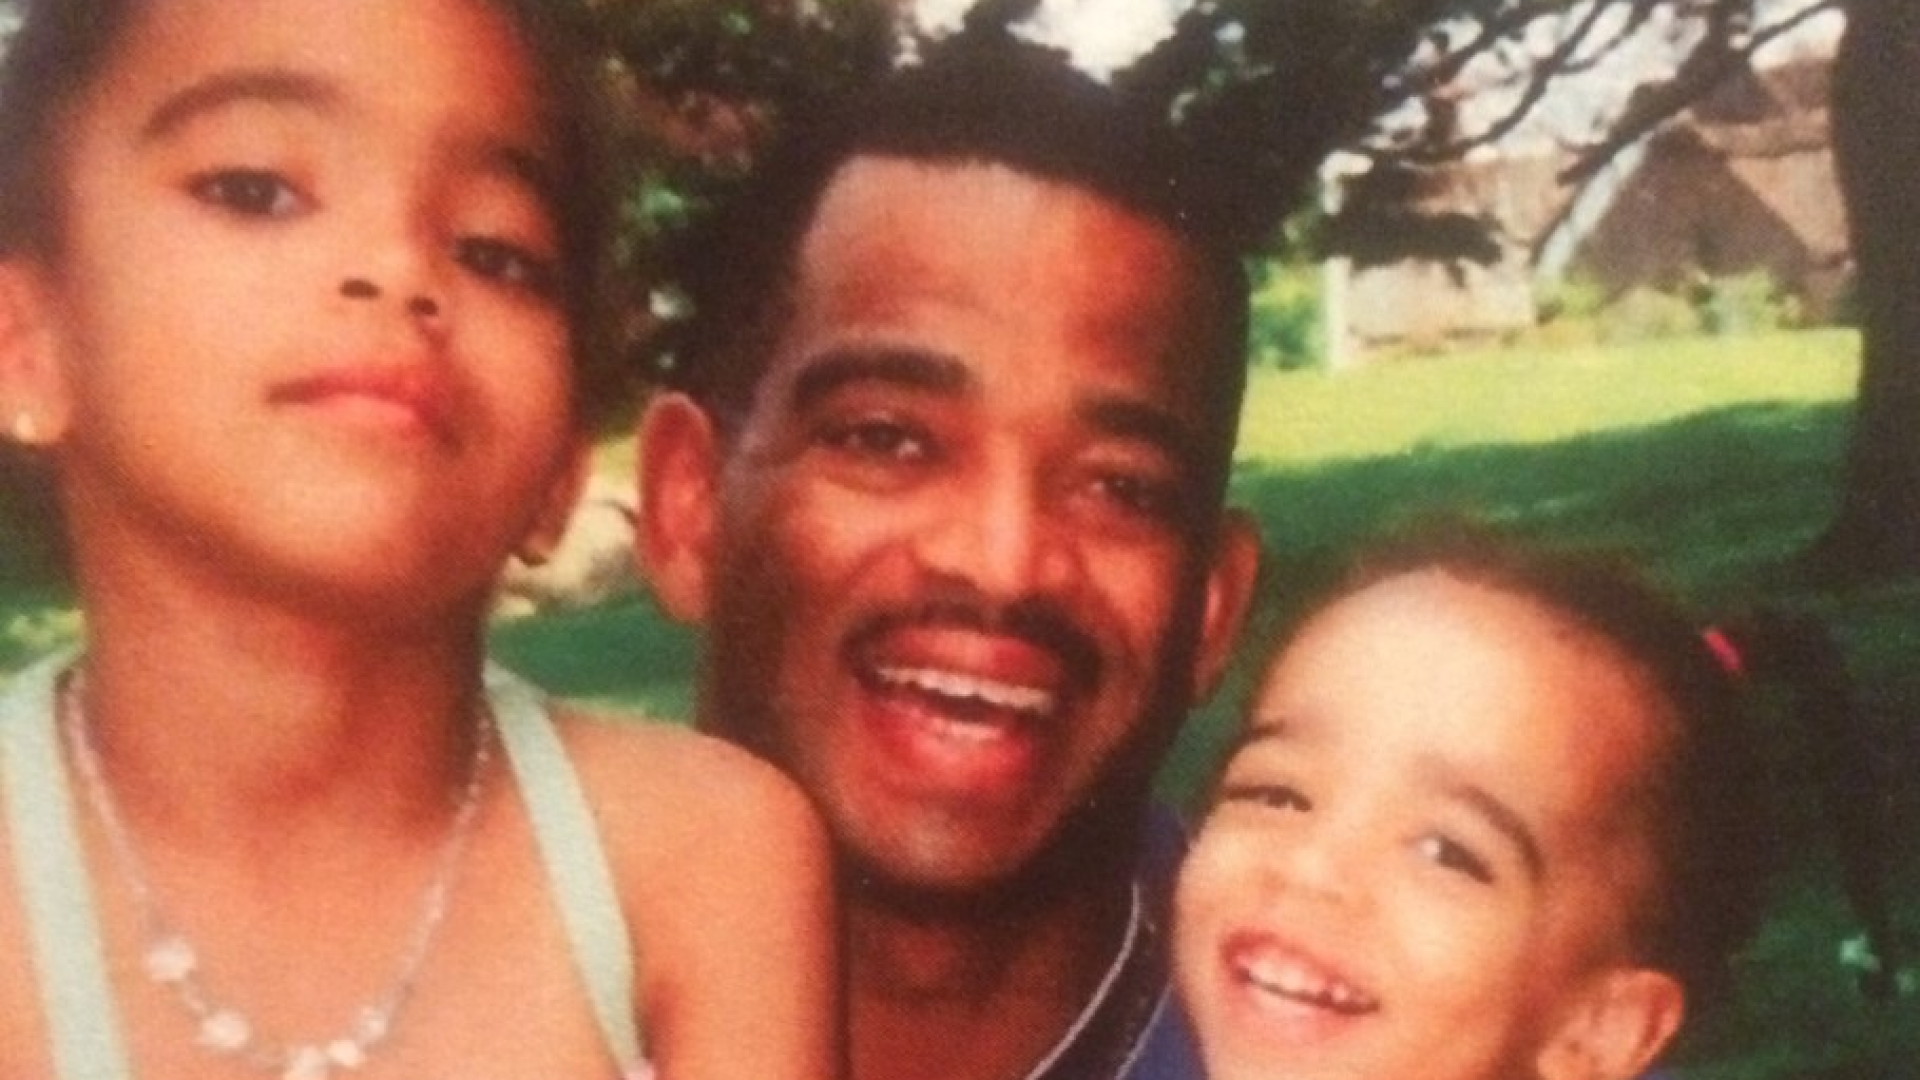 On The Anniversary of Stuart Scott’s Death, His Daughters Pay Tribute To His Legacy